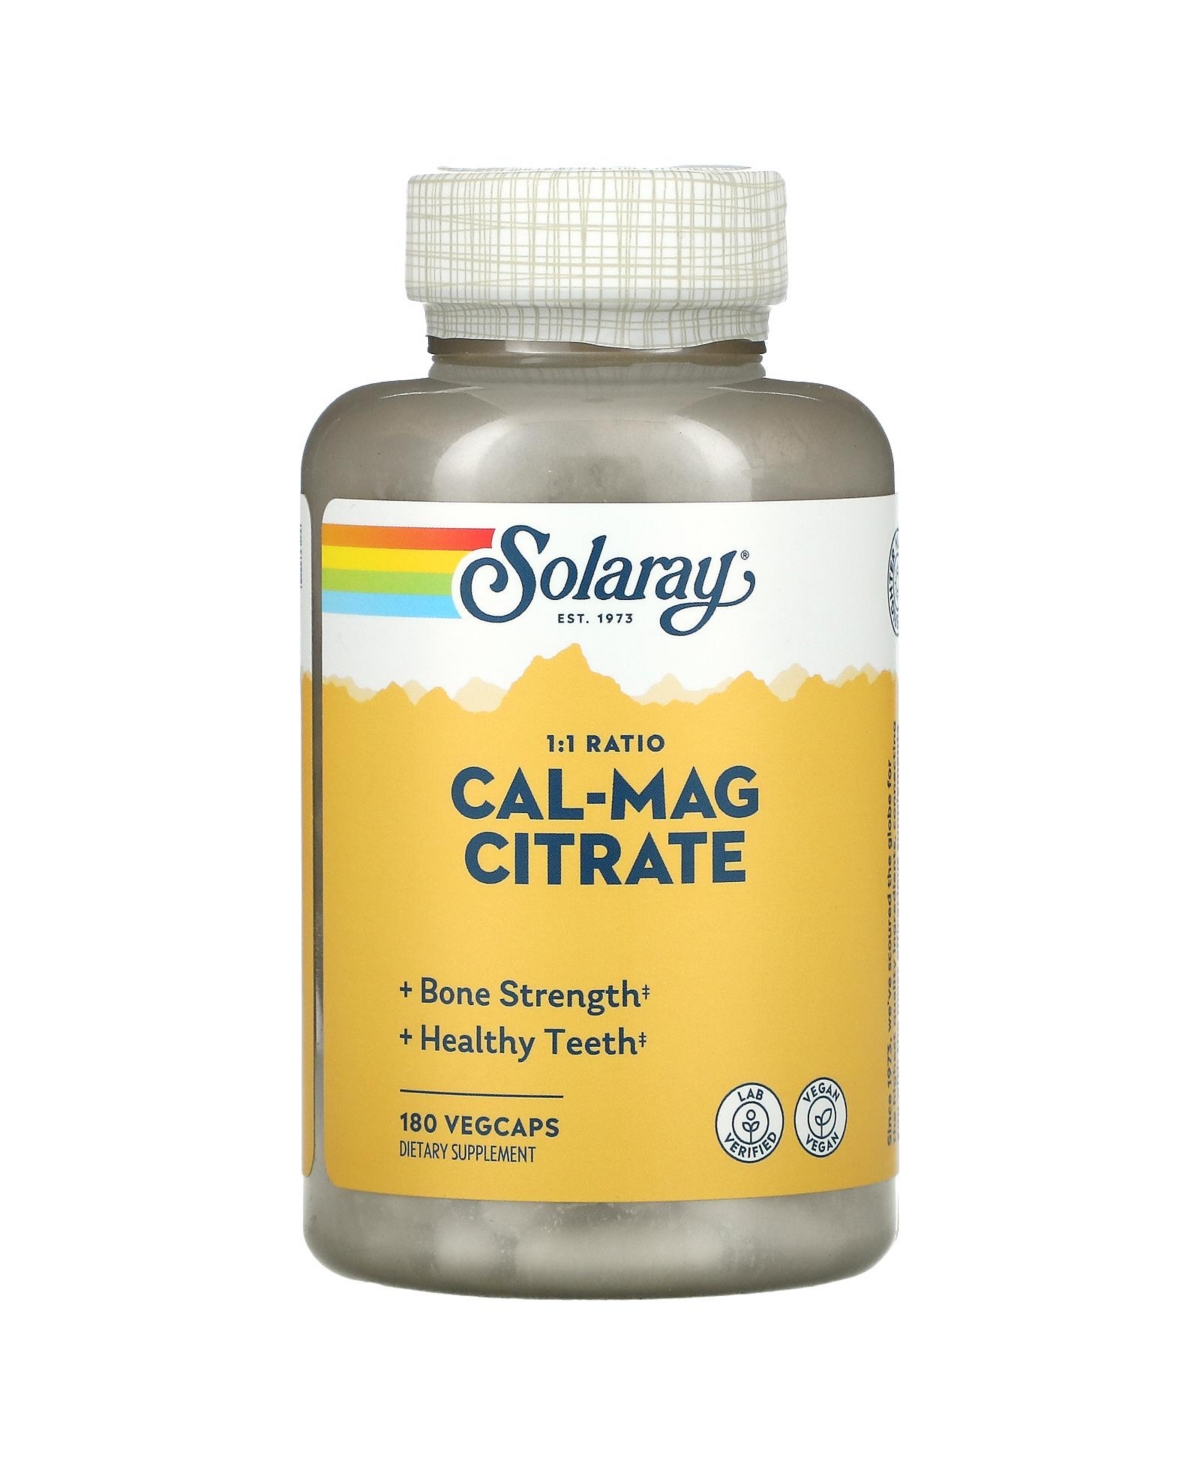 Cal-Mag Citrate 1:1 Ratio - 180 VegCaps - Assorted Pre-pack (See Table